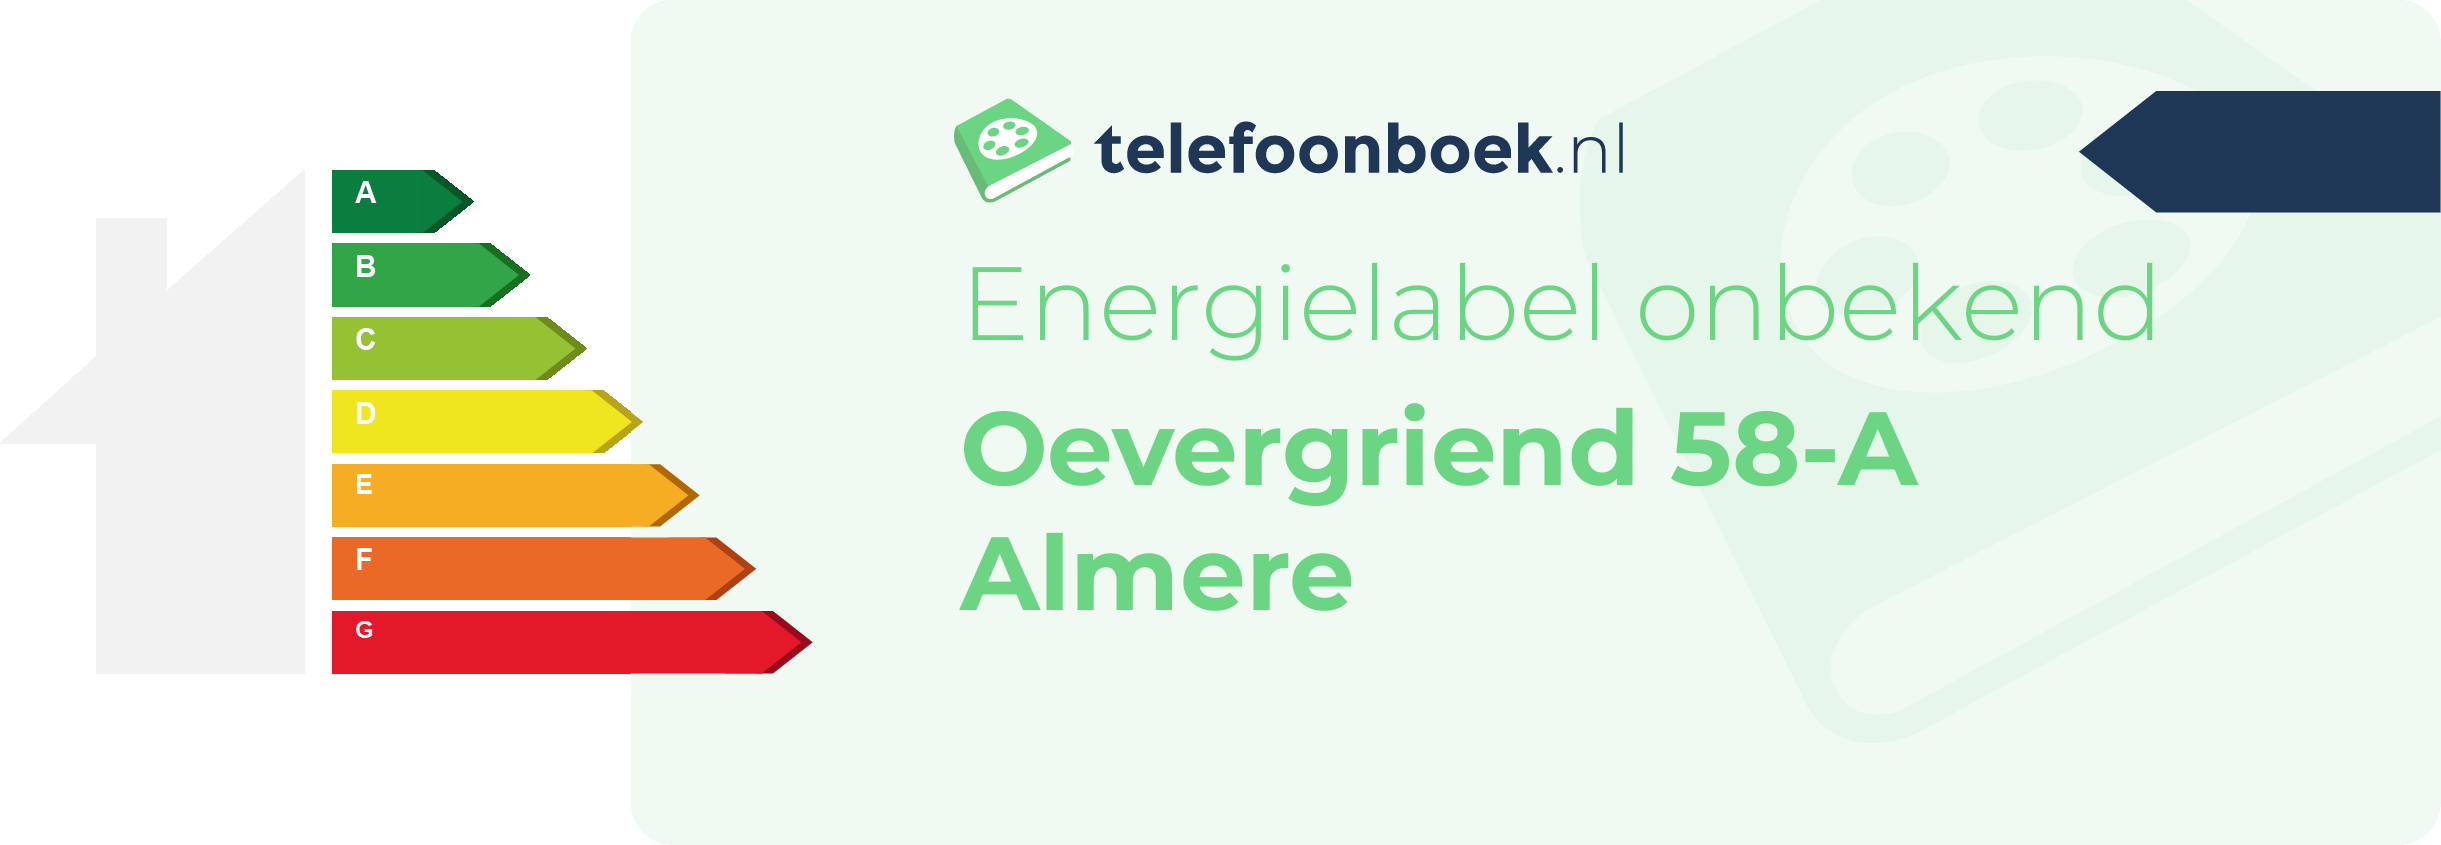 Energielabel Oevergriend 58-A Almere